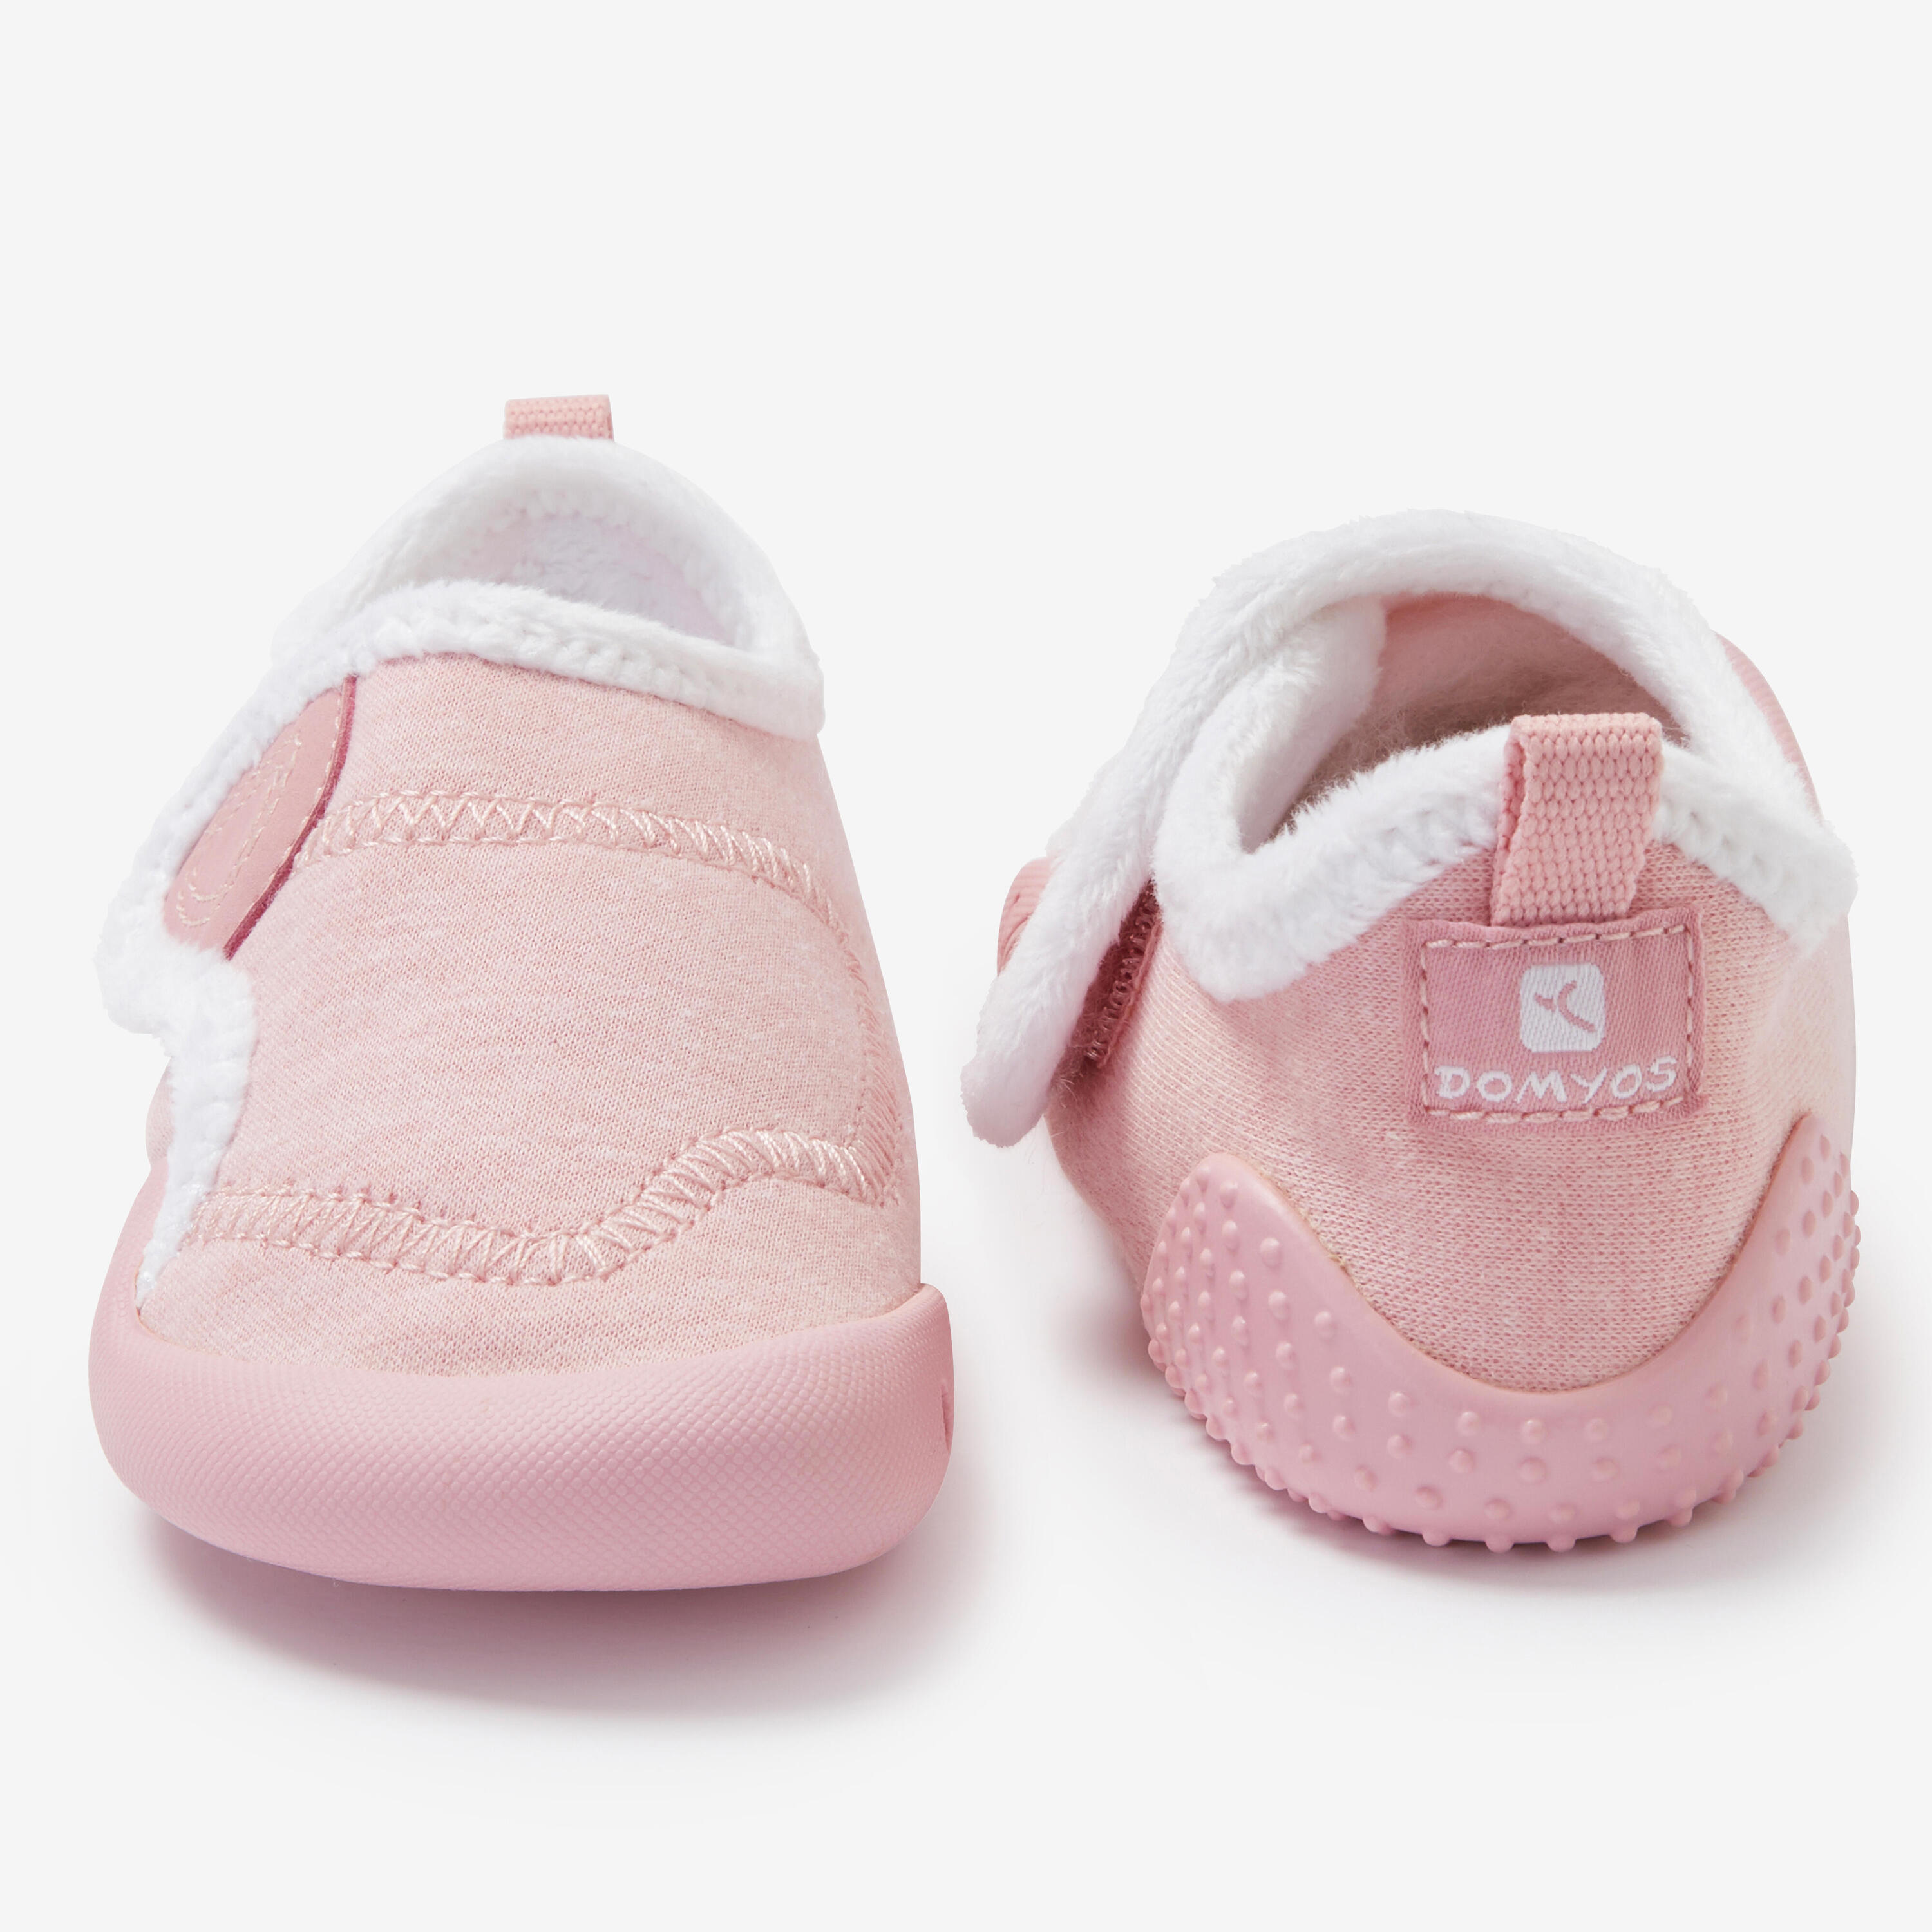 Kids' Comfortable Bootee 550 Babylight - Pink 4/7